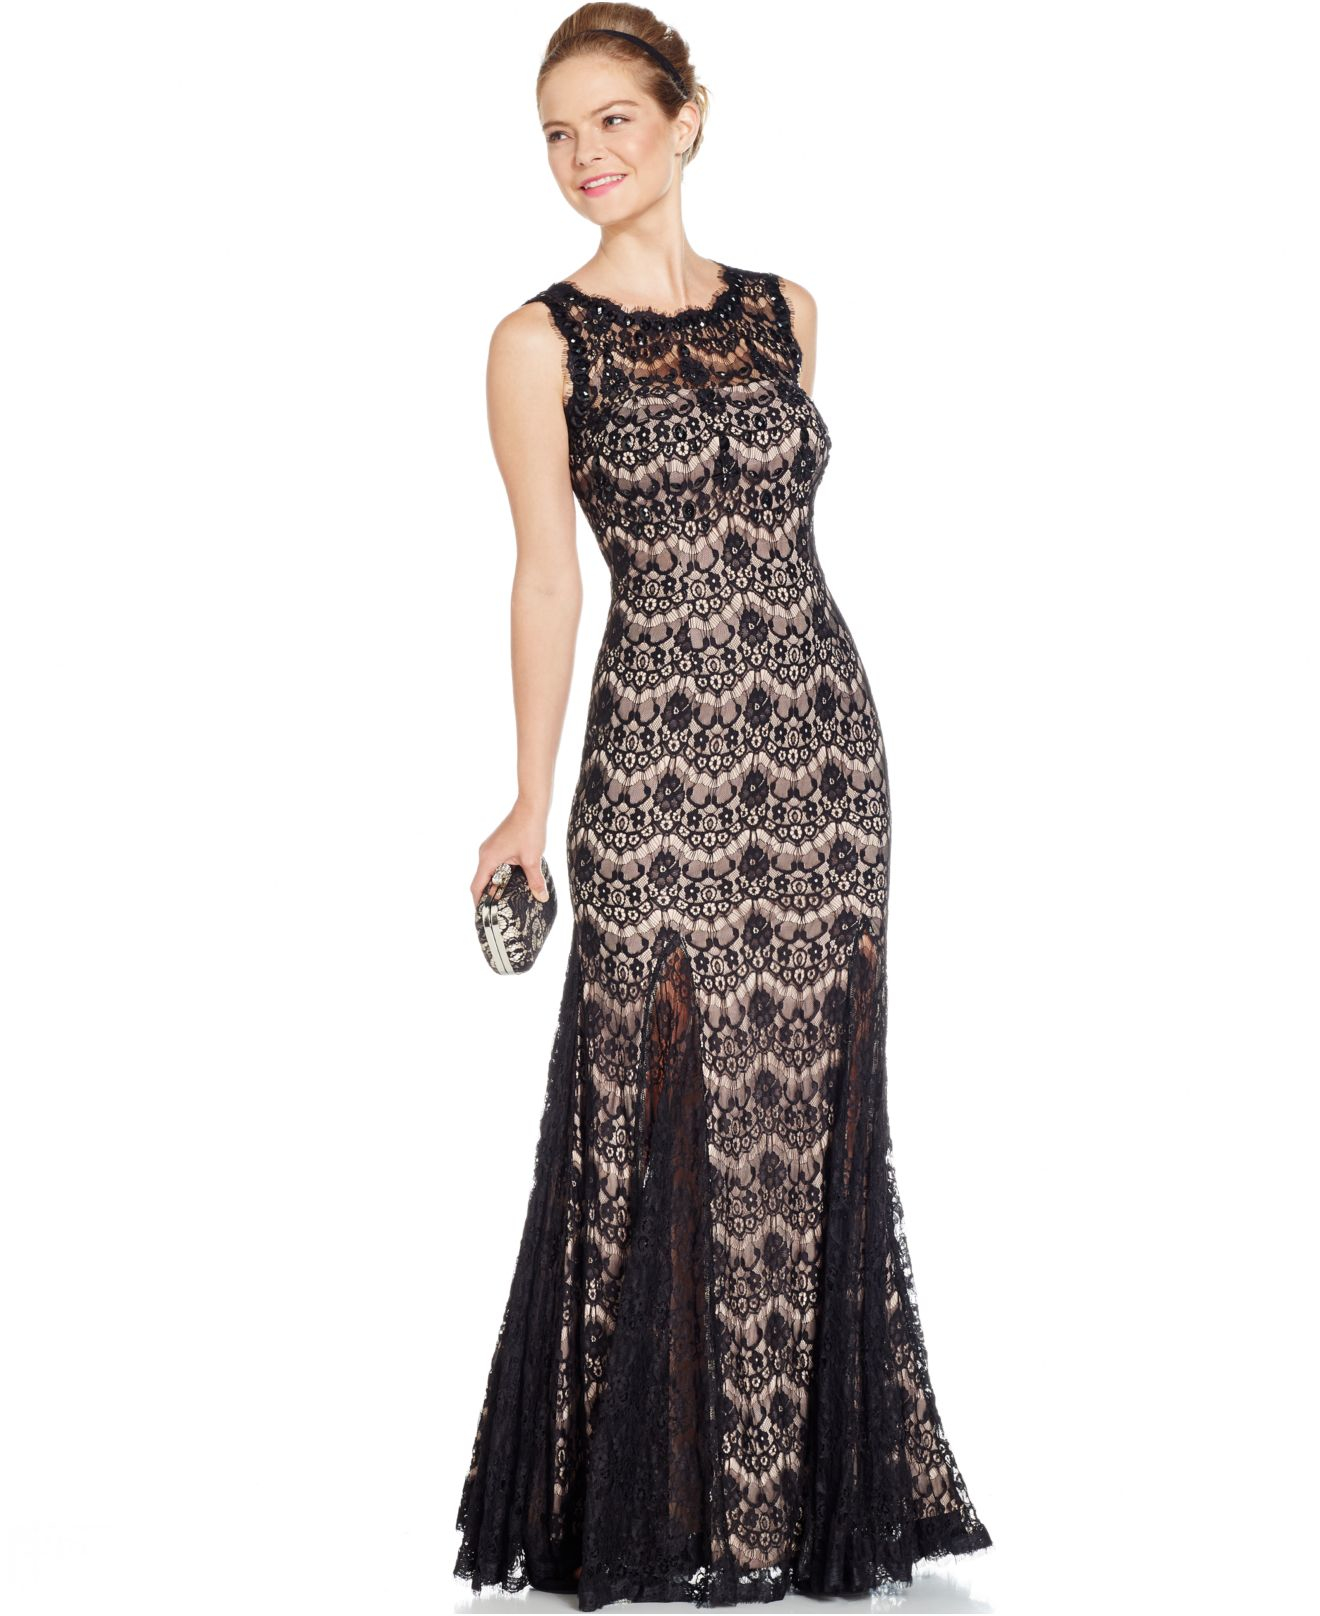 Lyst - Betsy & Adam Open-back Lace Gown in Black